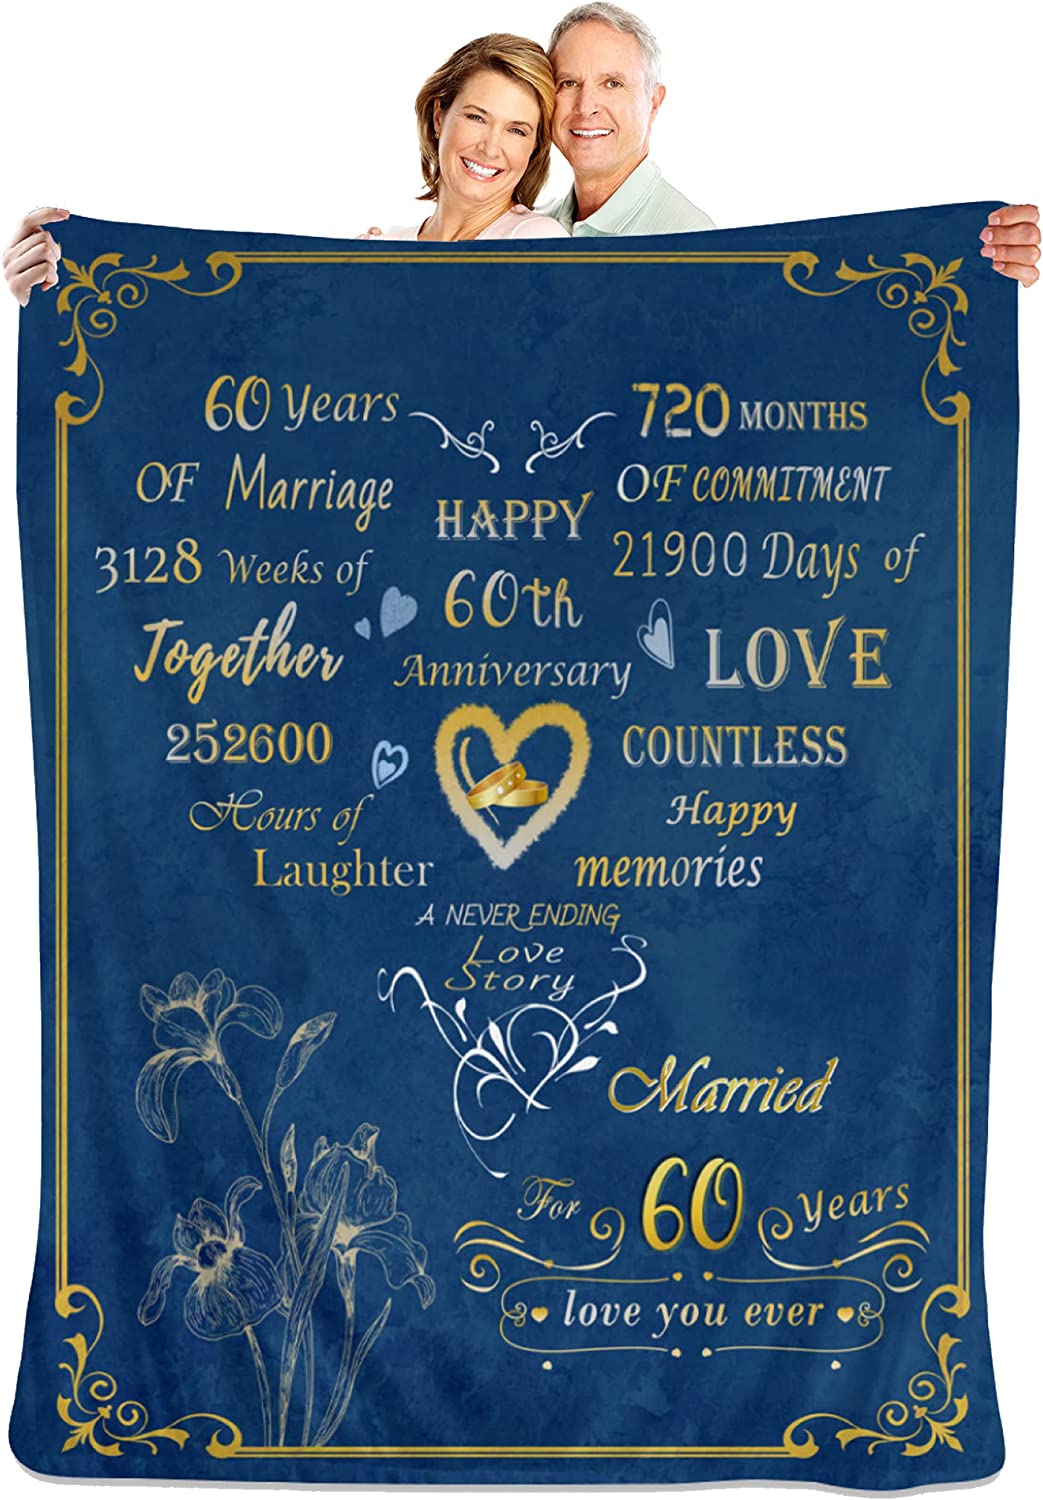 60th Wedding Anniversary Gift 60th Anniversary Gifts Personalized For  Couple For | eBay